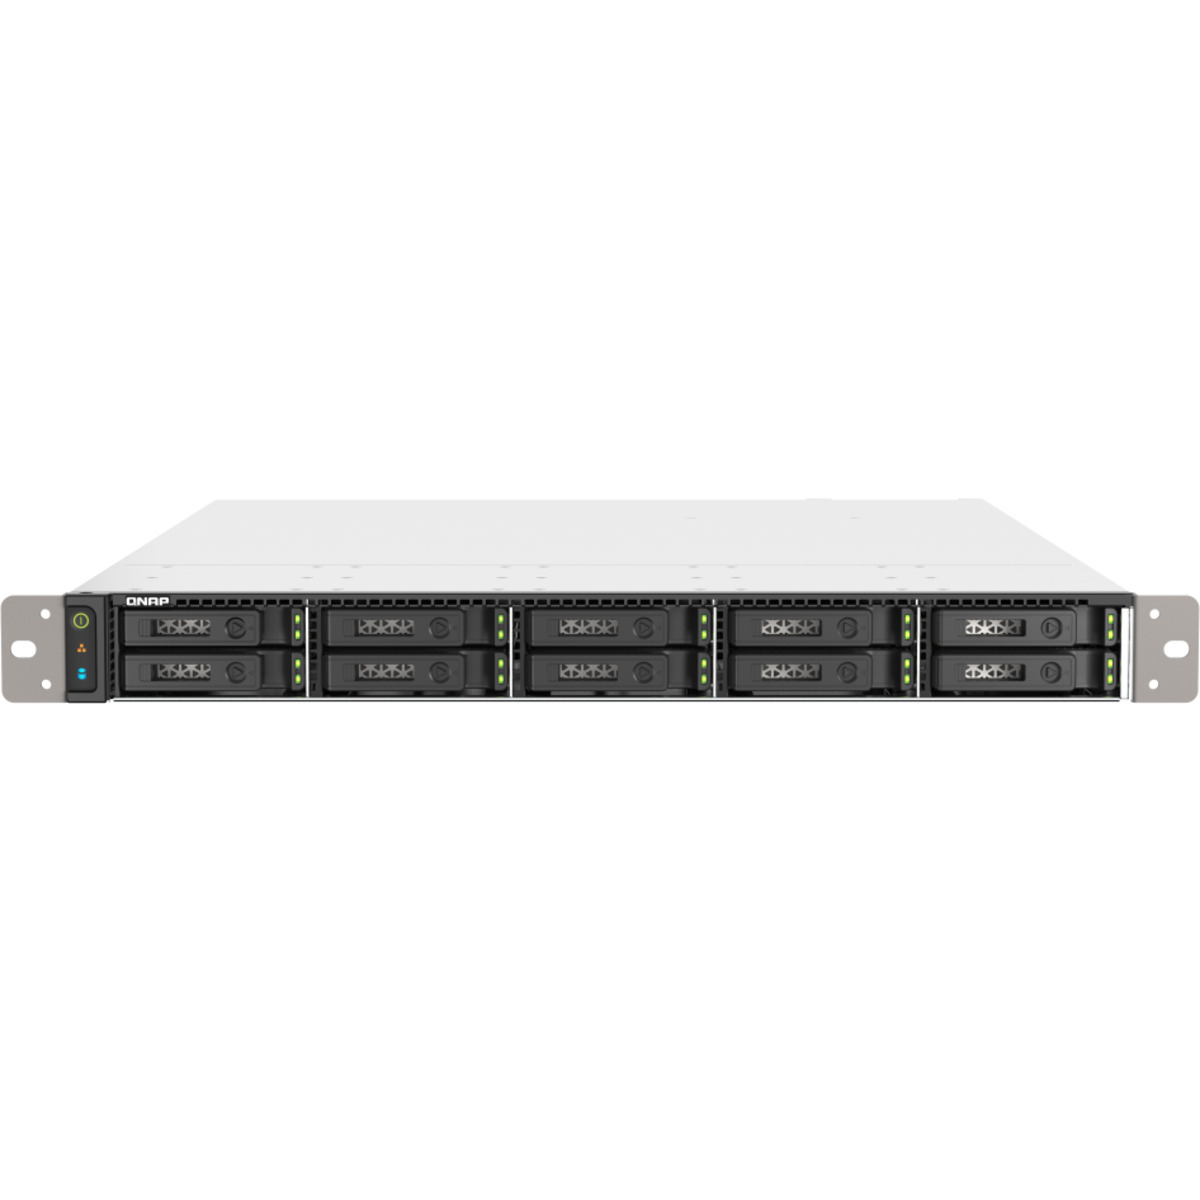 QNAP TS-h1090FU-7232P 14tb 10-Bay RackMount Large Business / Enterprise NAS - Network Attached Storage Device 7x2tb Crucial P3 Plus CT2000P3PSSD8  5000/4200MB/s M.2 2280 NVMe SSD CONSUMER Class Drives Installed - Burn-In Tested TS-h1090FU-7232P